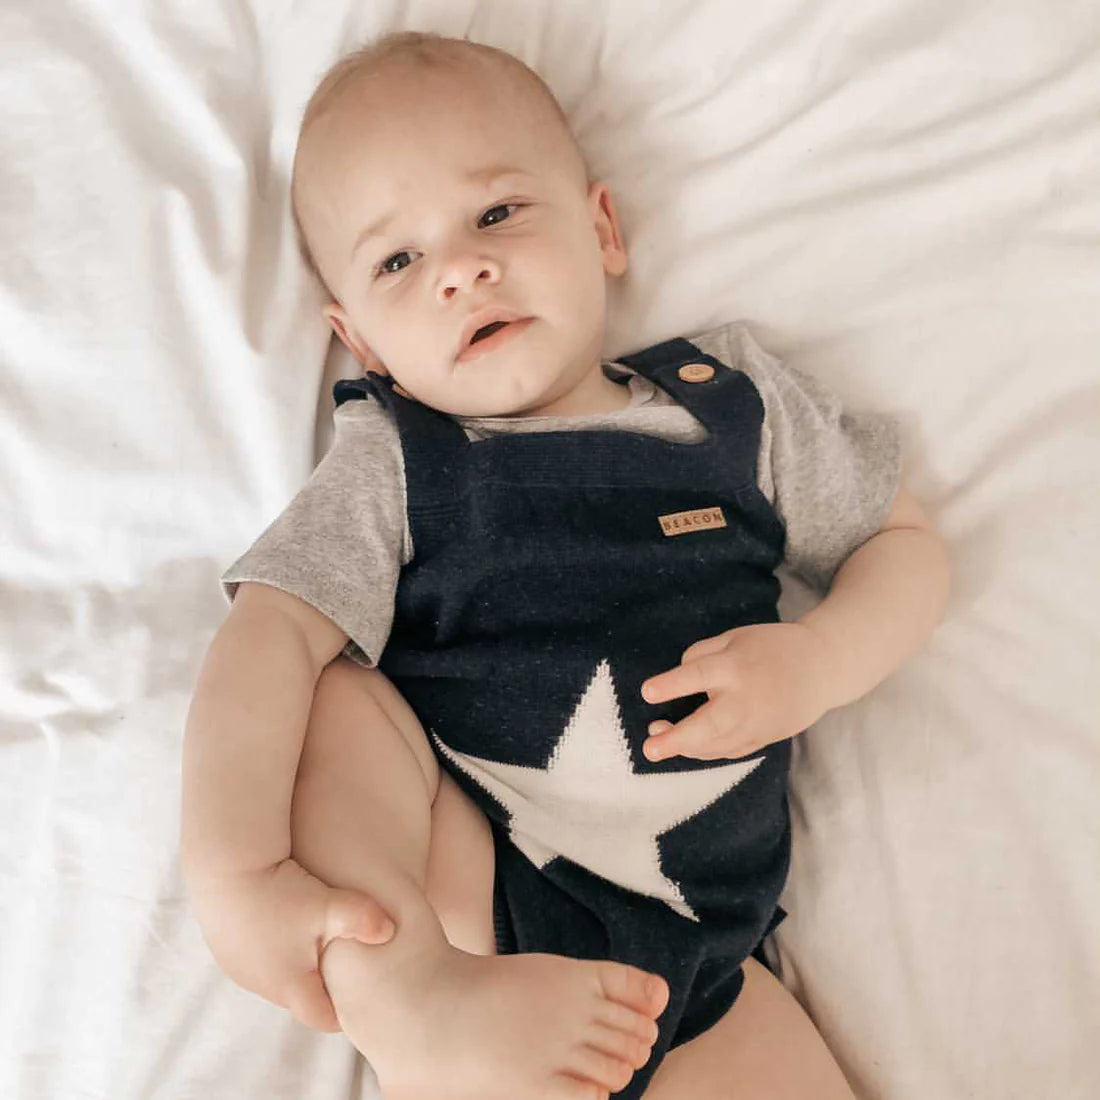 Beacon London Navy Star Romper-Rompers-Second Snuggle Preloved